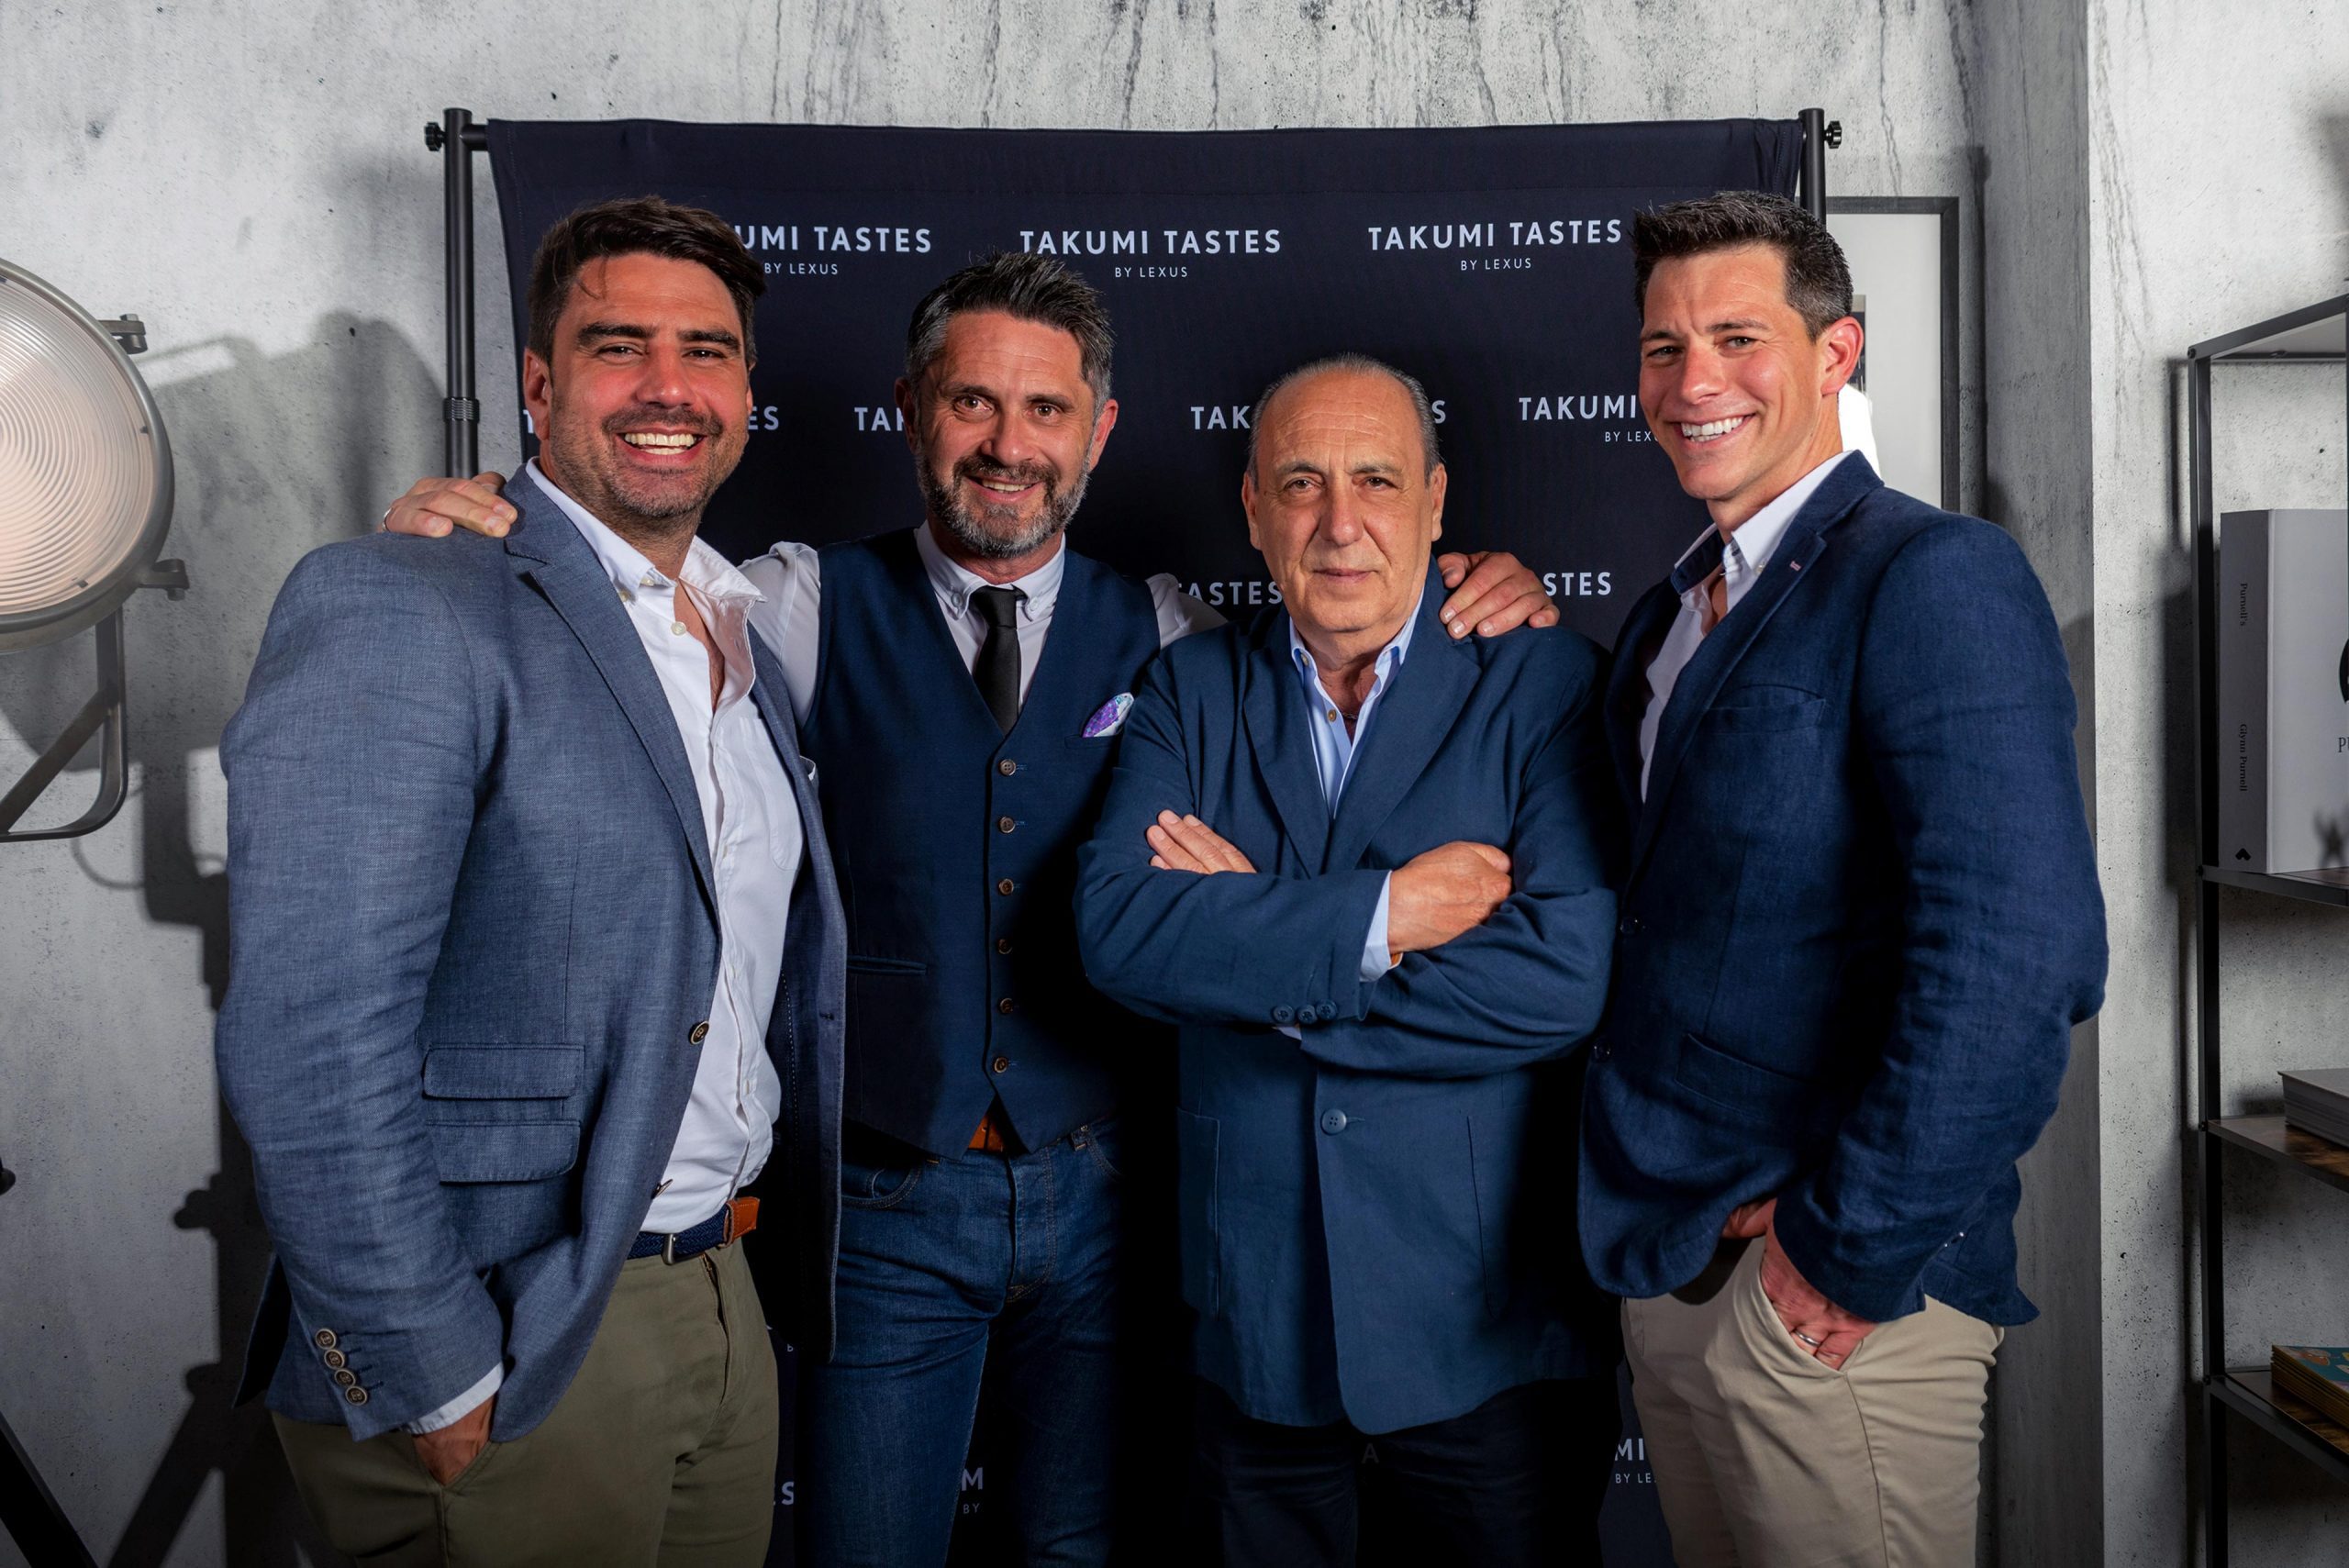 Group of renowned celebrity chefs smiling and posing for the camera at an exclusive event.